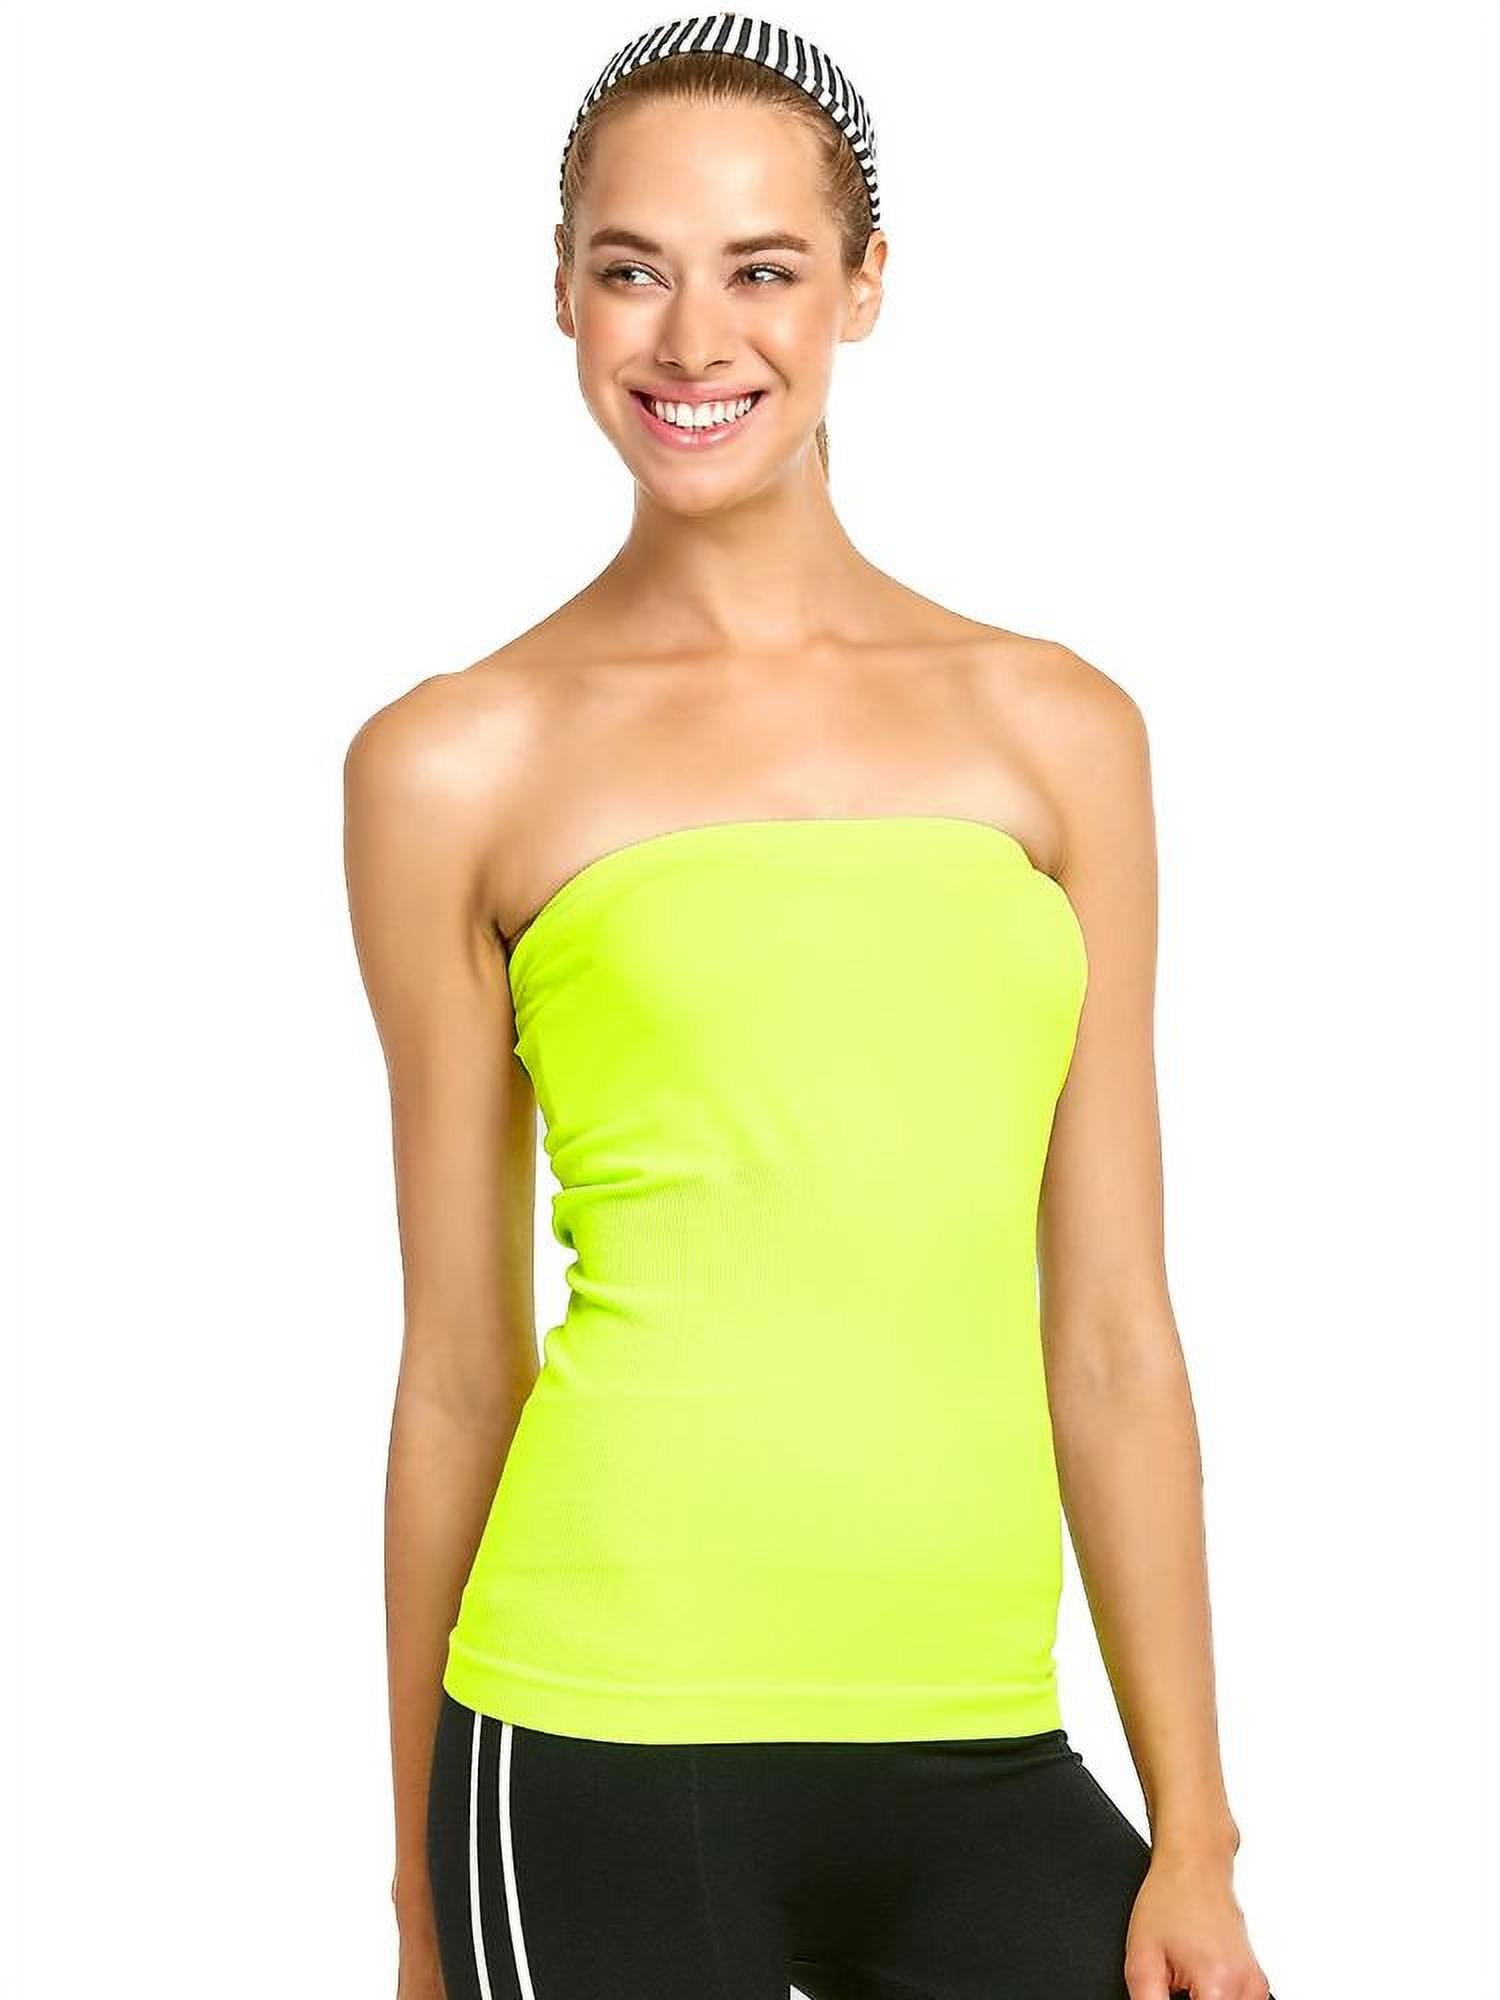 LAVRA Women's Tube Top Seamless Color Strapless Camisole 